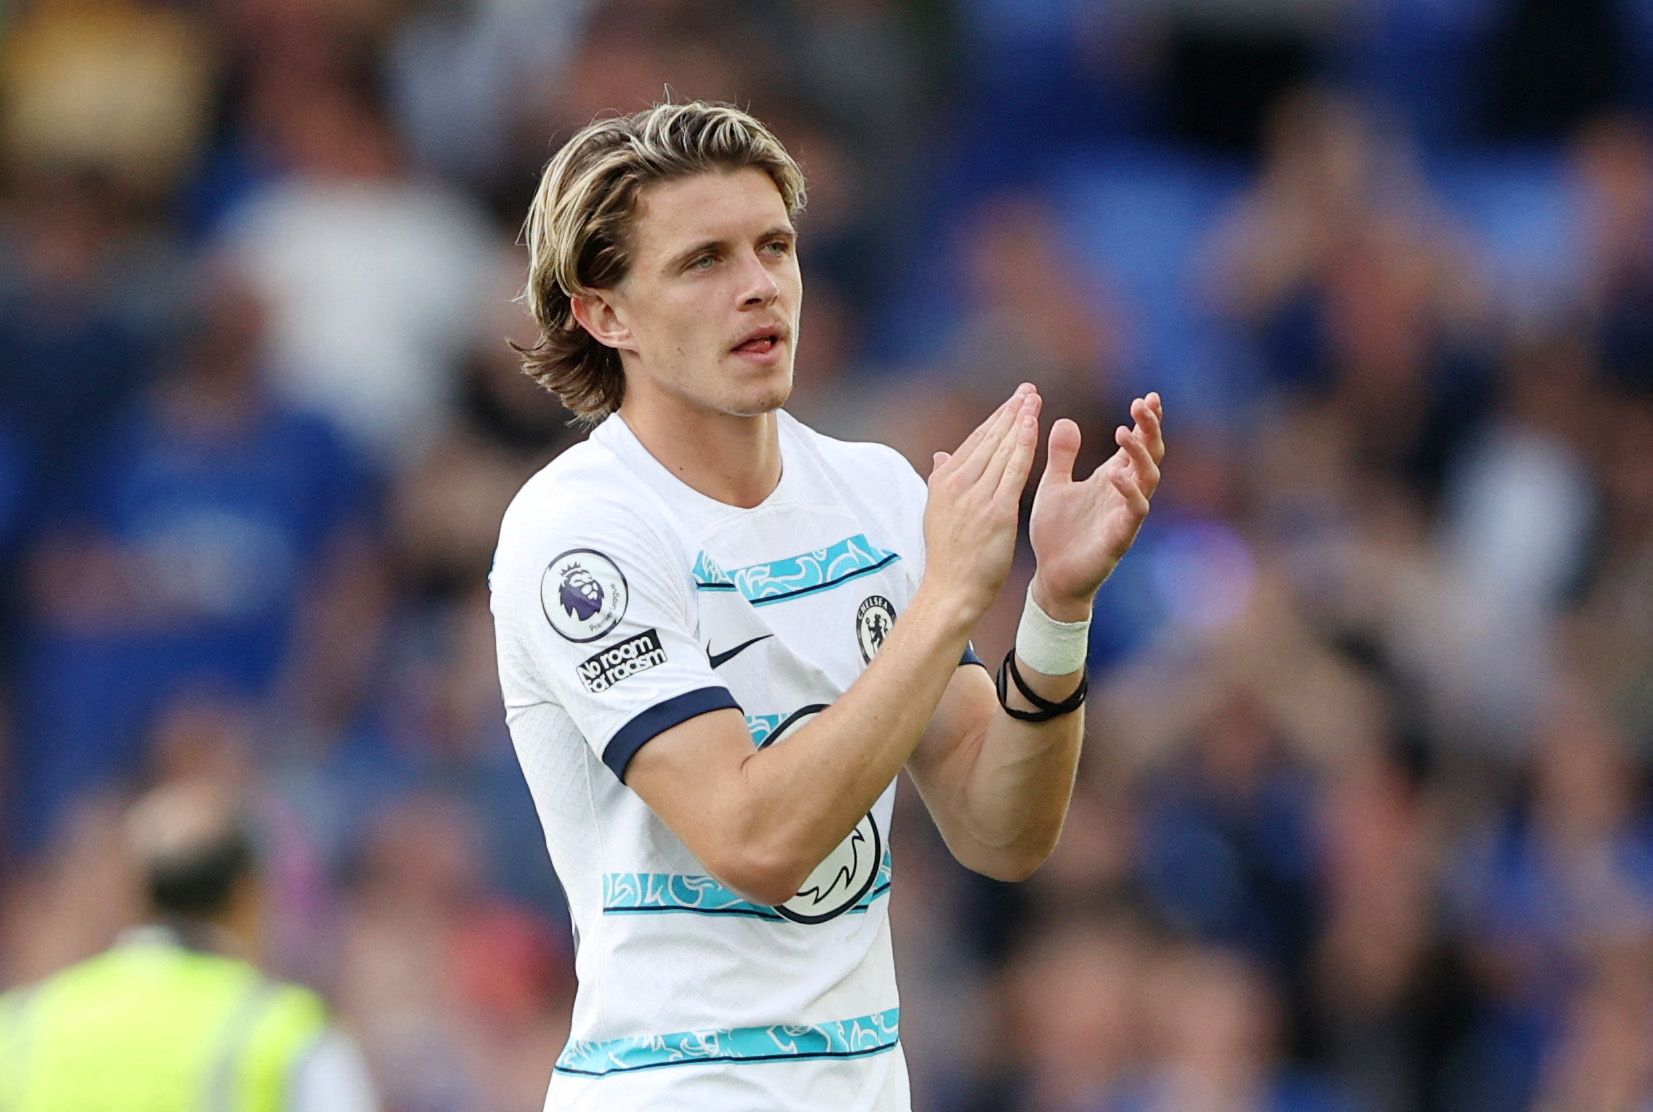 Newcastle: Magpies keen to sign Conor Gallagher before Thursday -Follow up